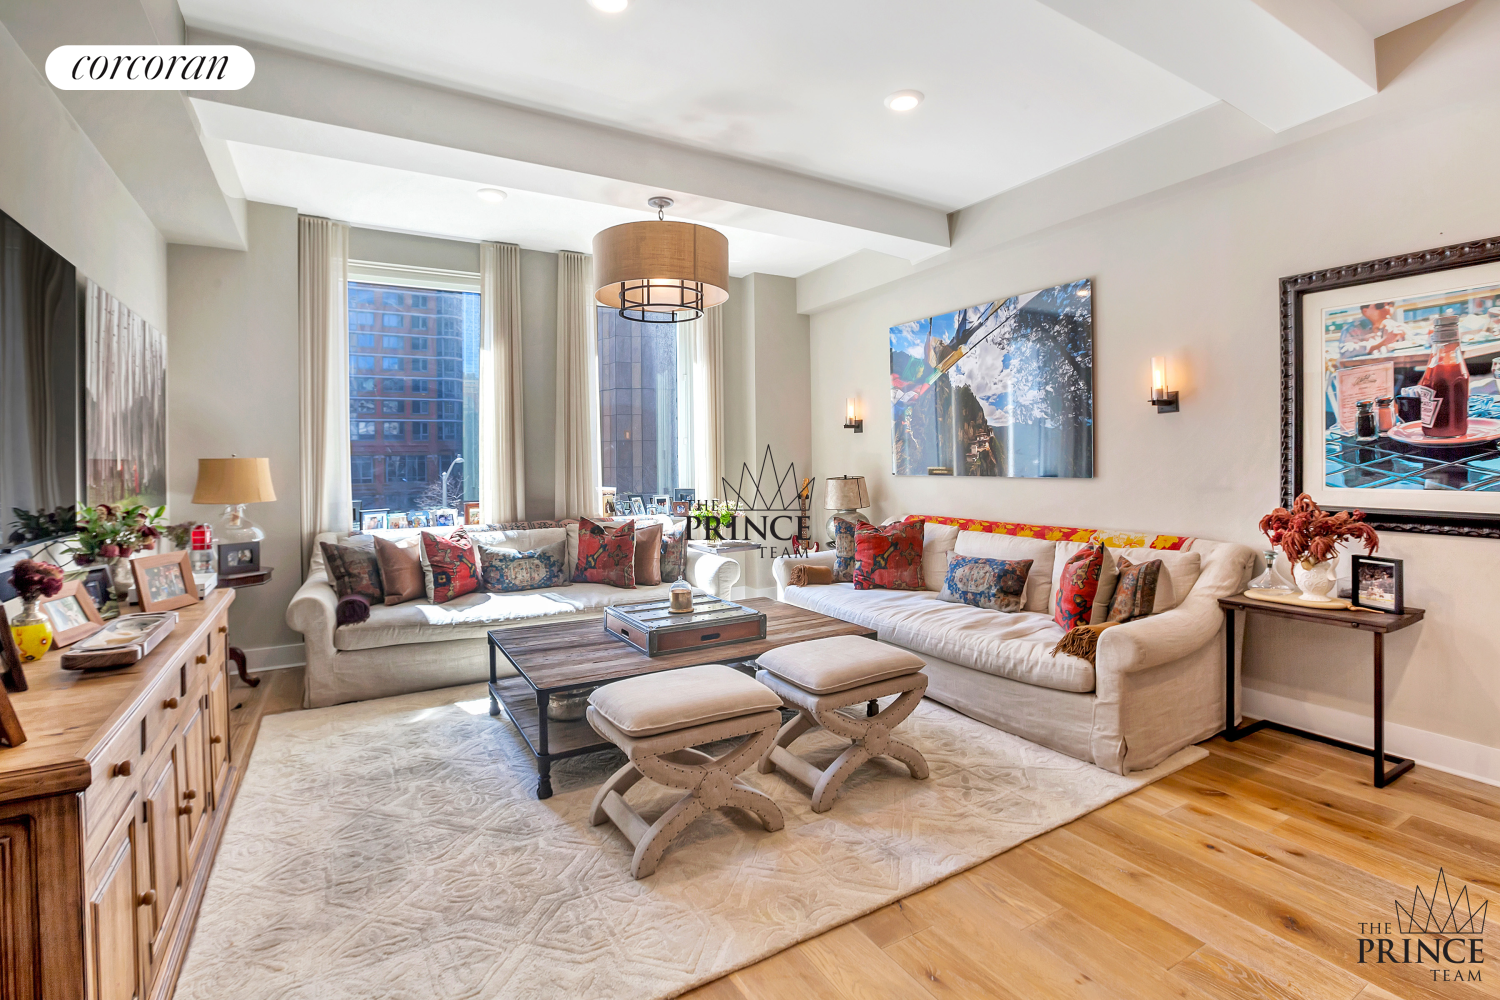 93 Worth Street 211, Tribeca, Downtown, NYC - 2 Bedrooms  
2 Bathrooms  
5 Rooms - 